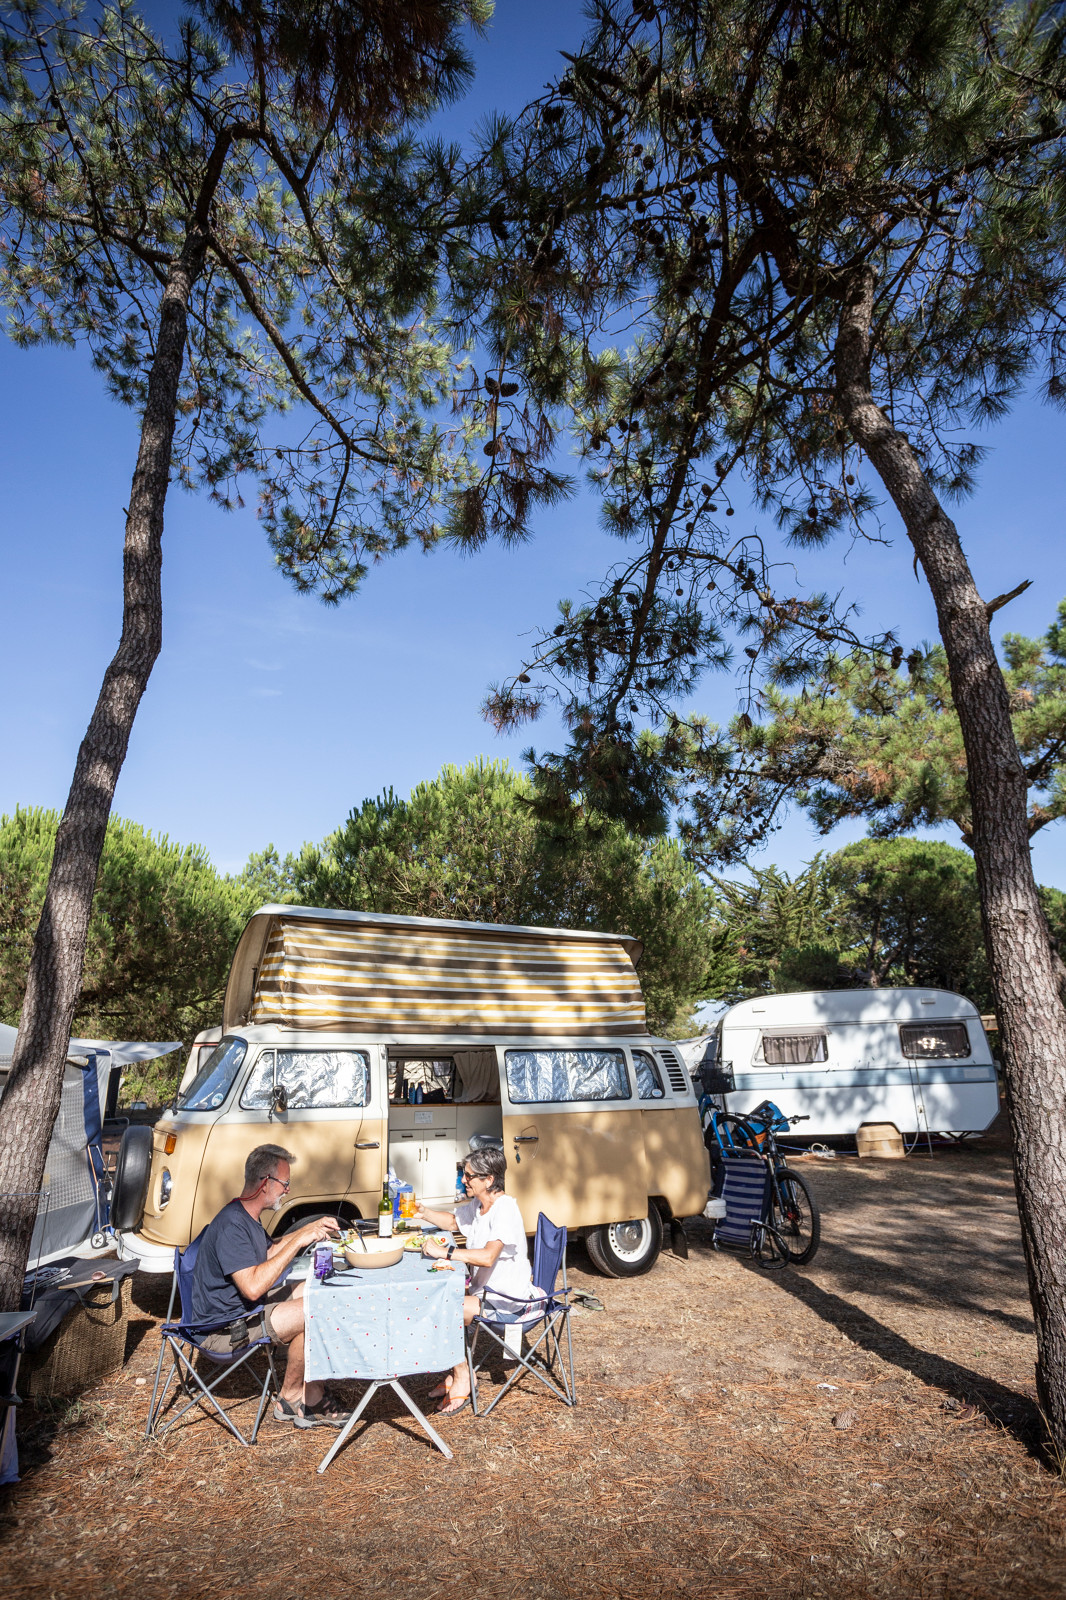 Emplacement - Emplacement Camping Confort - Camping Huttopia Noirmoutier